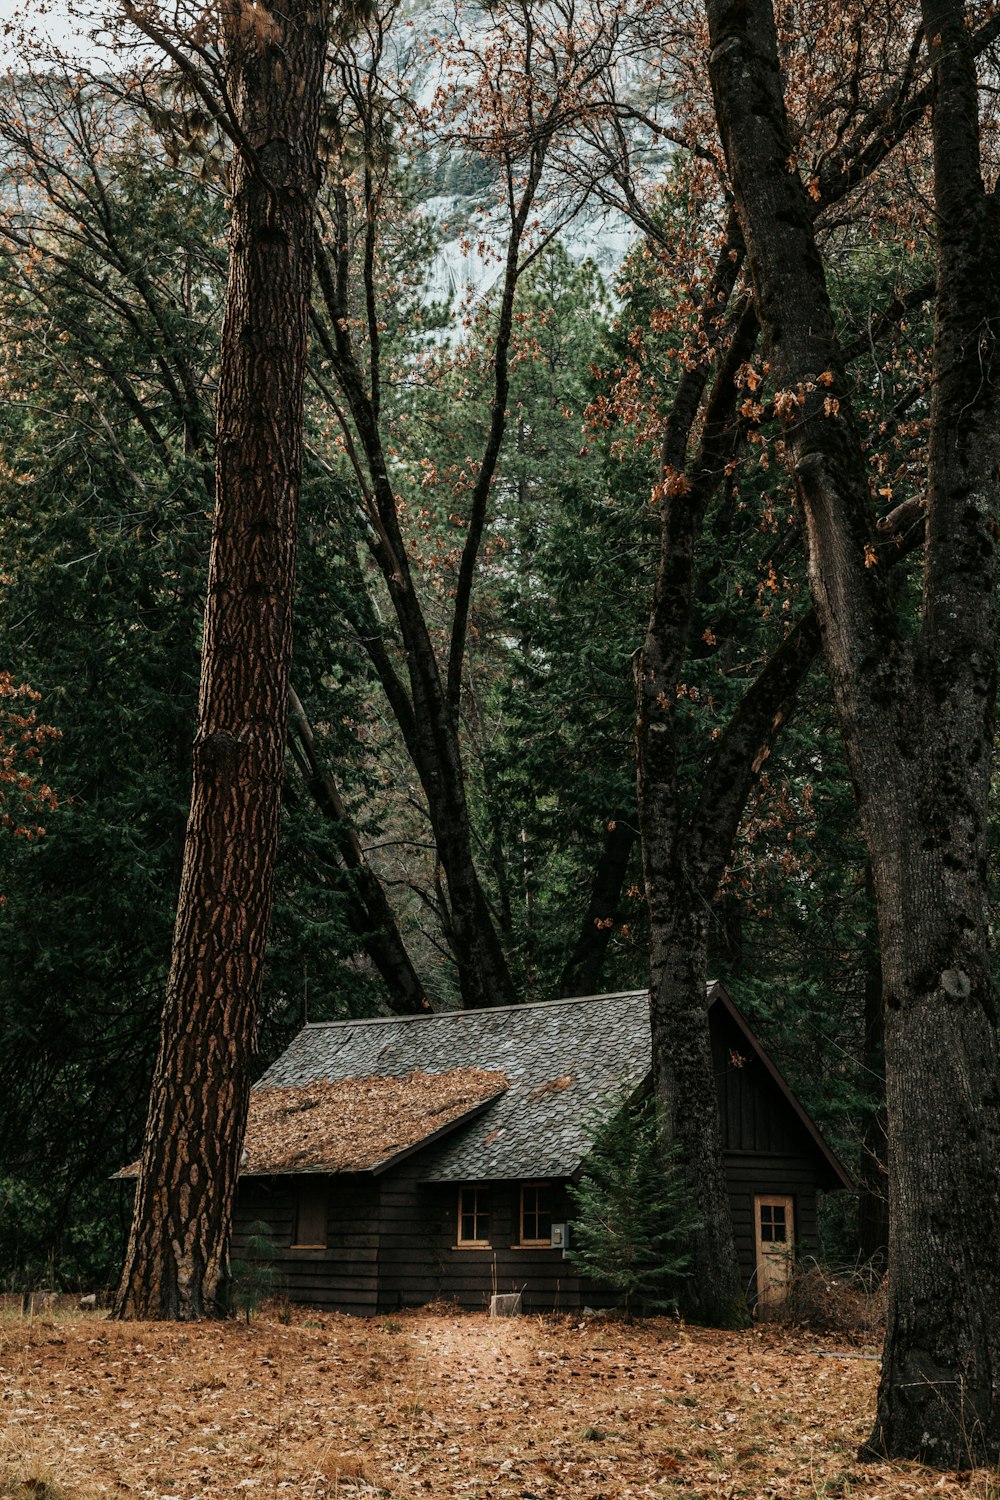 Forest House Pictures | Download Free Images & Stock Photos on Unsplash